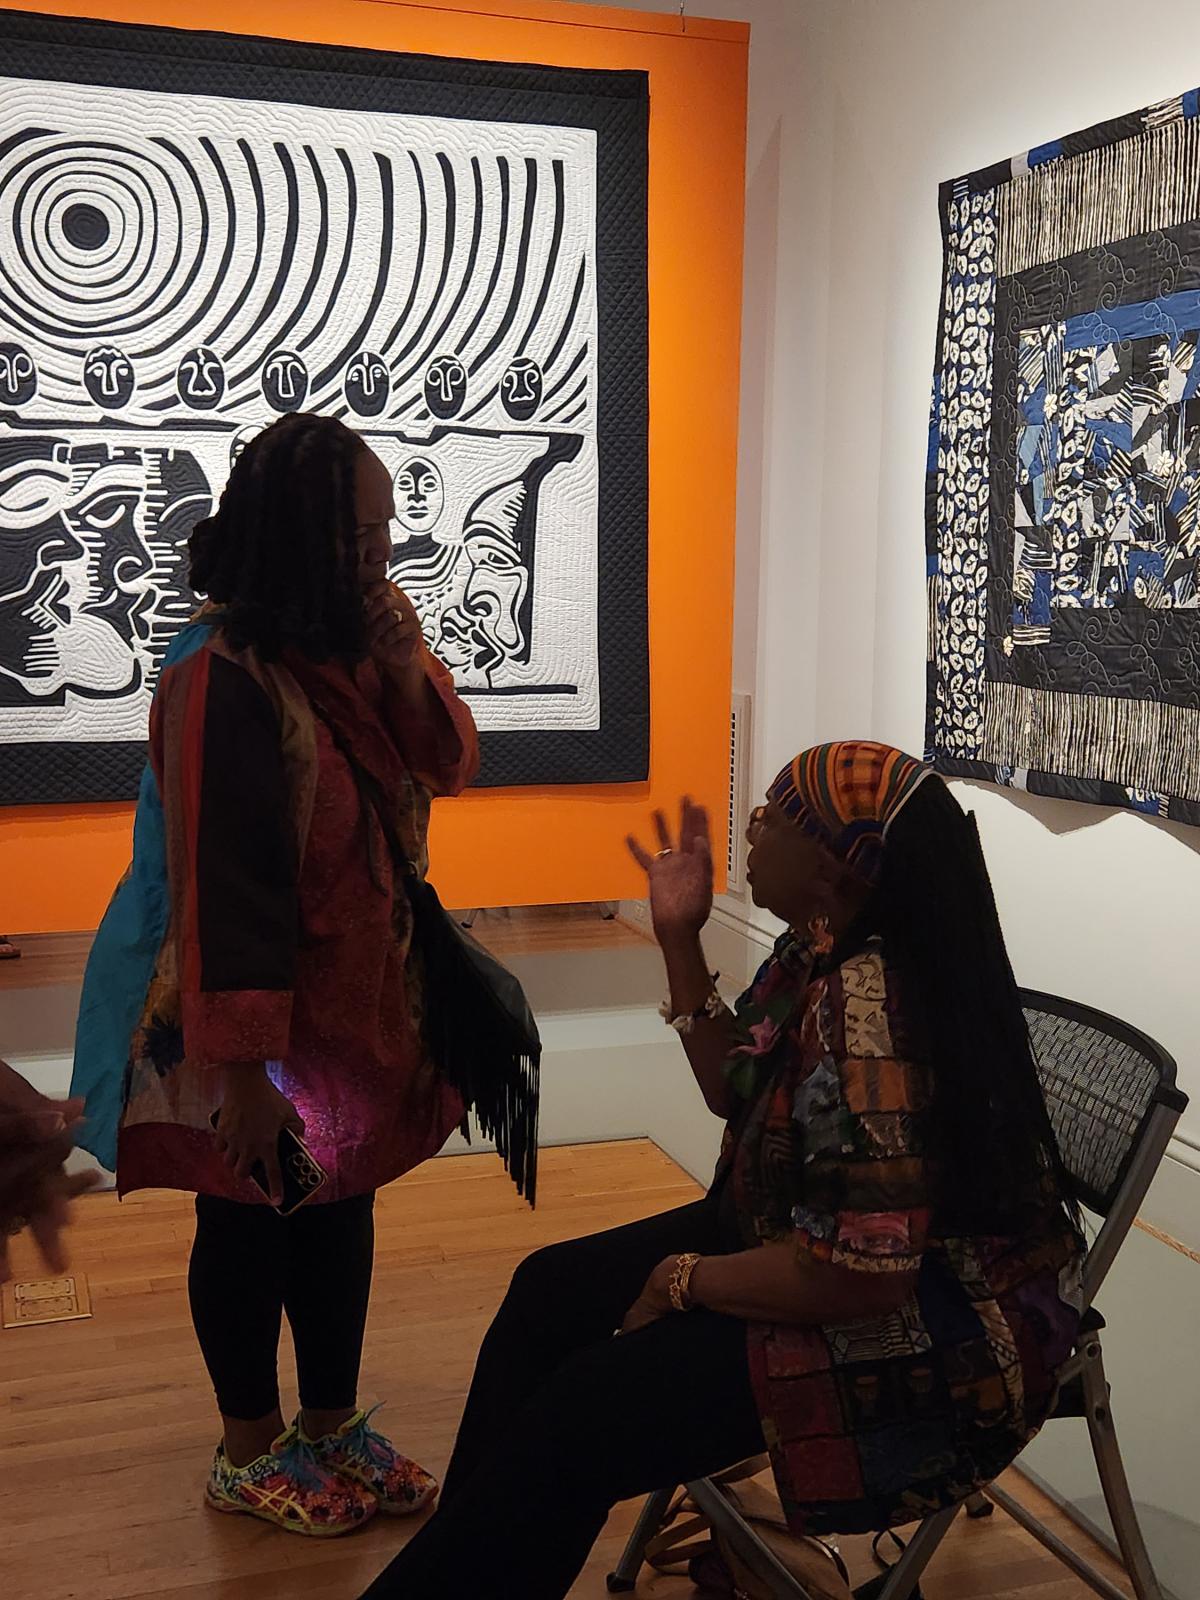 A person sitting in a chair looks up at a person in front of her. Behind them, a black and white artwork hangs on an orange wall.